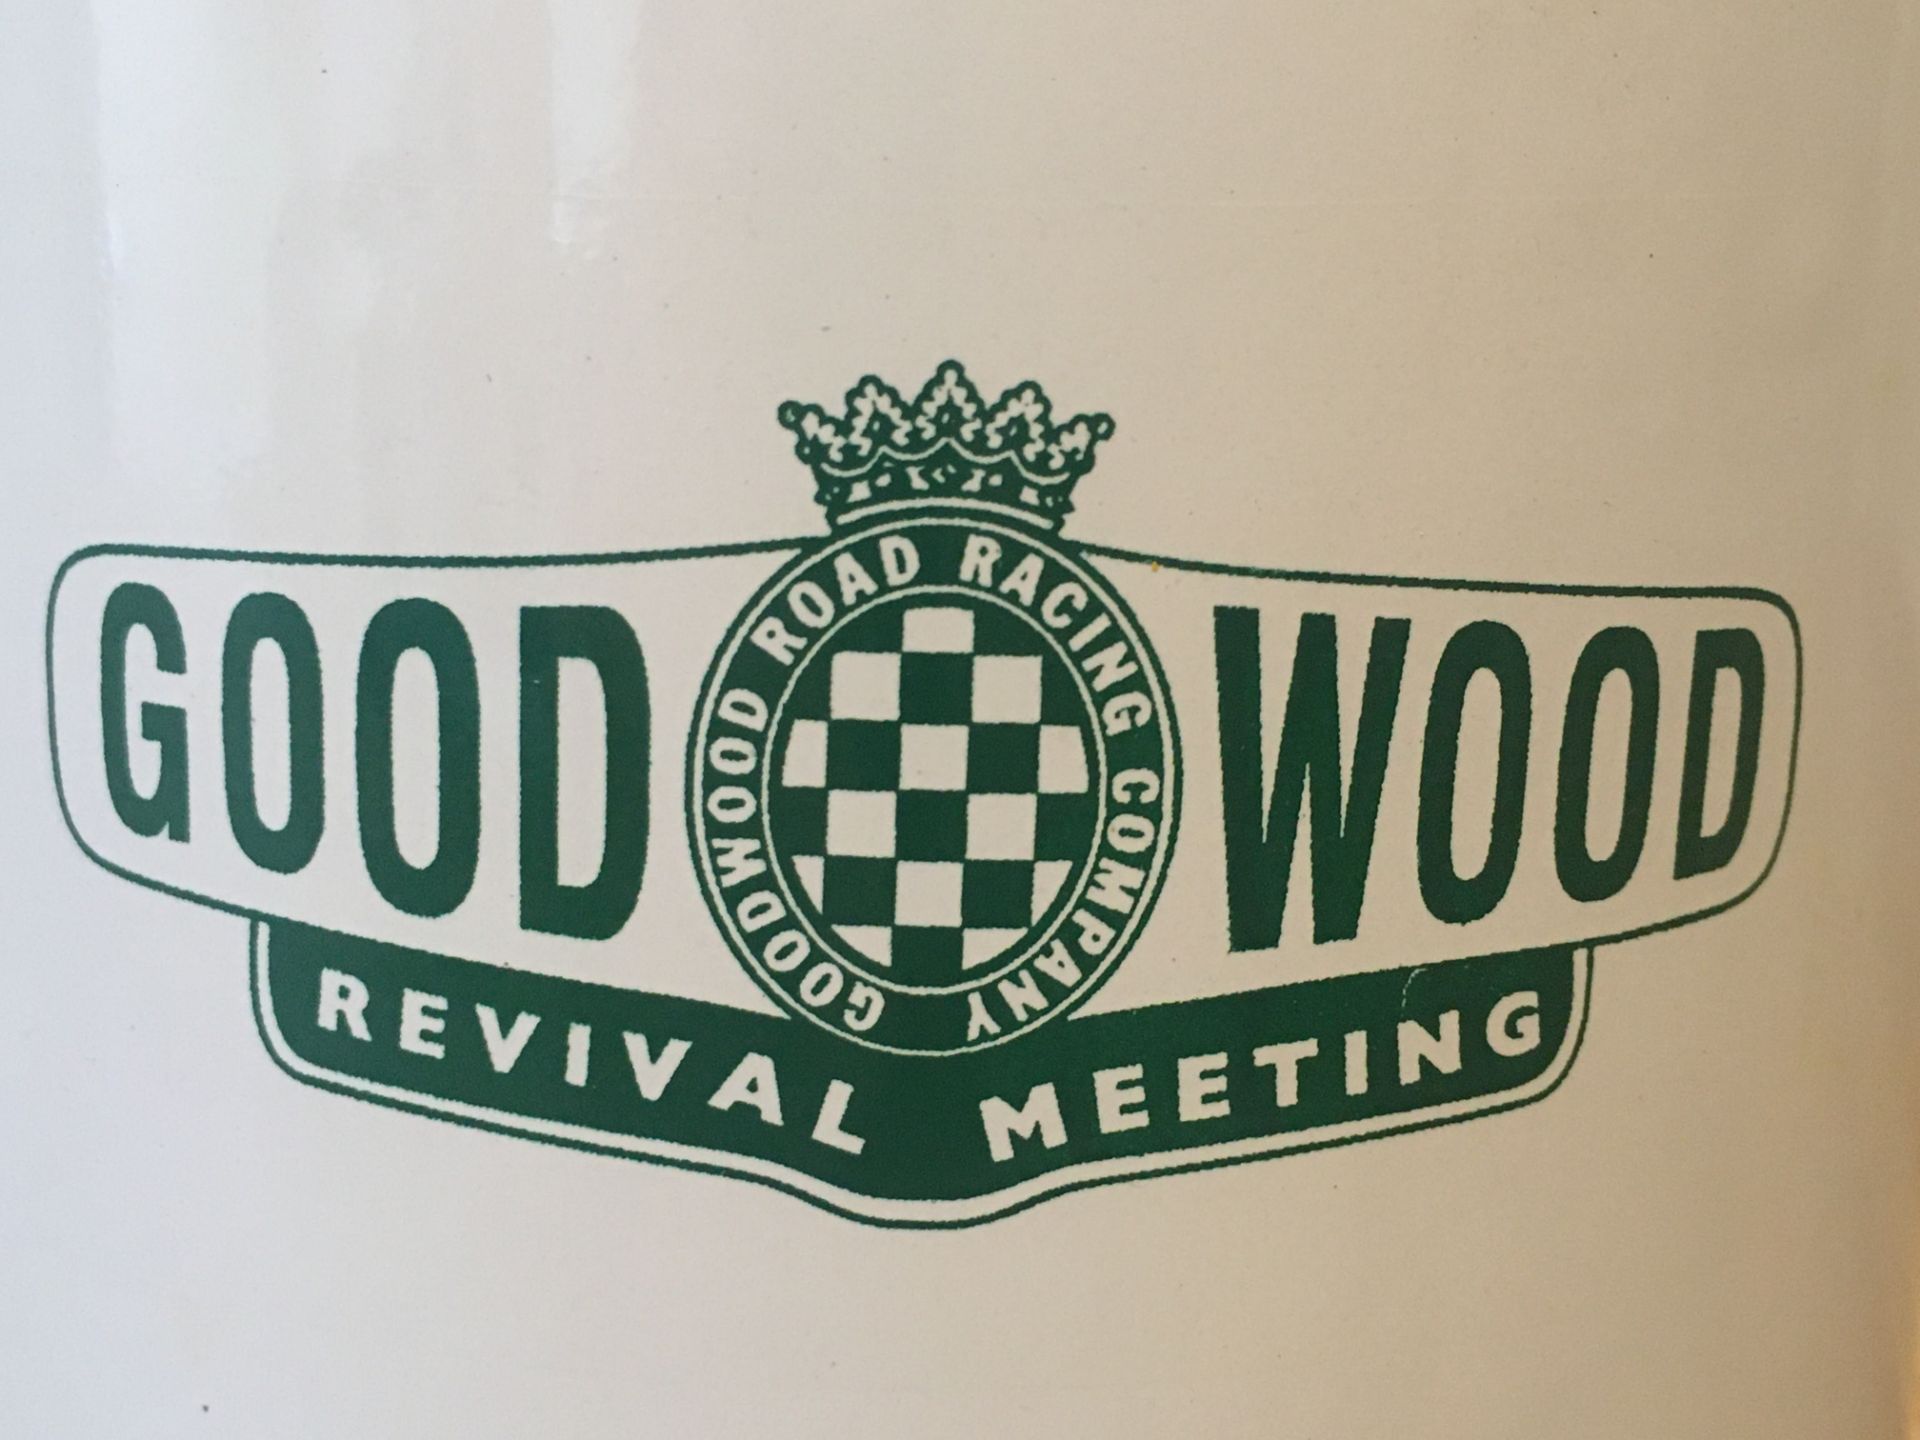 Official Goodwood Revival Meeting Mug - Image 2 of 5